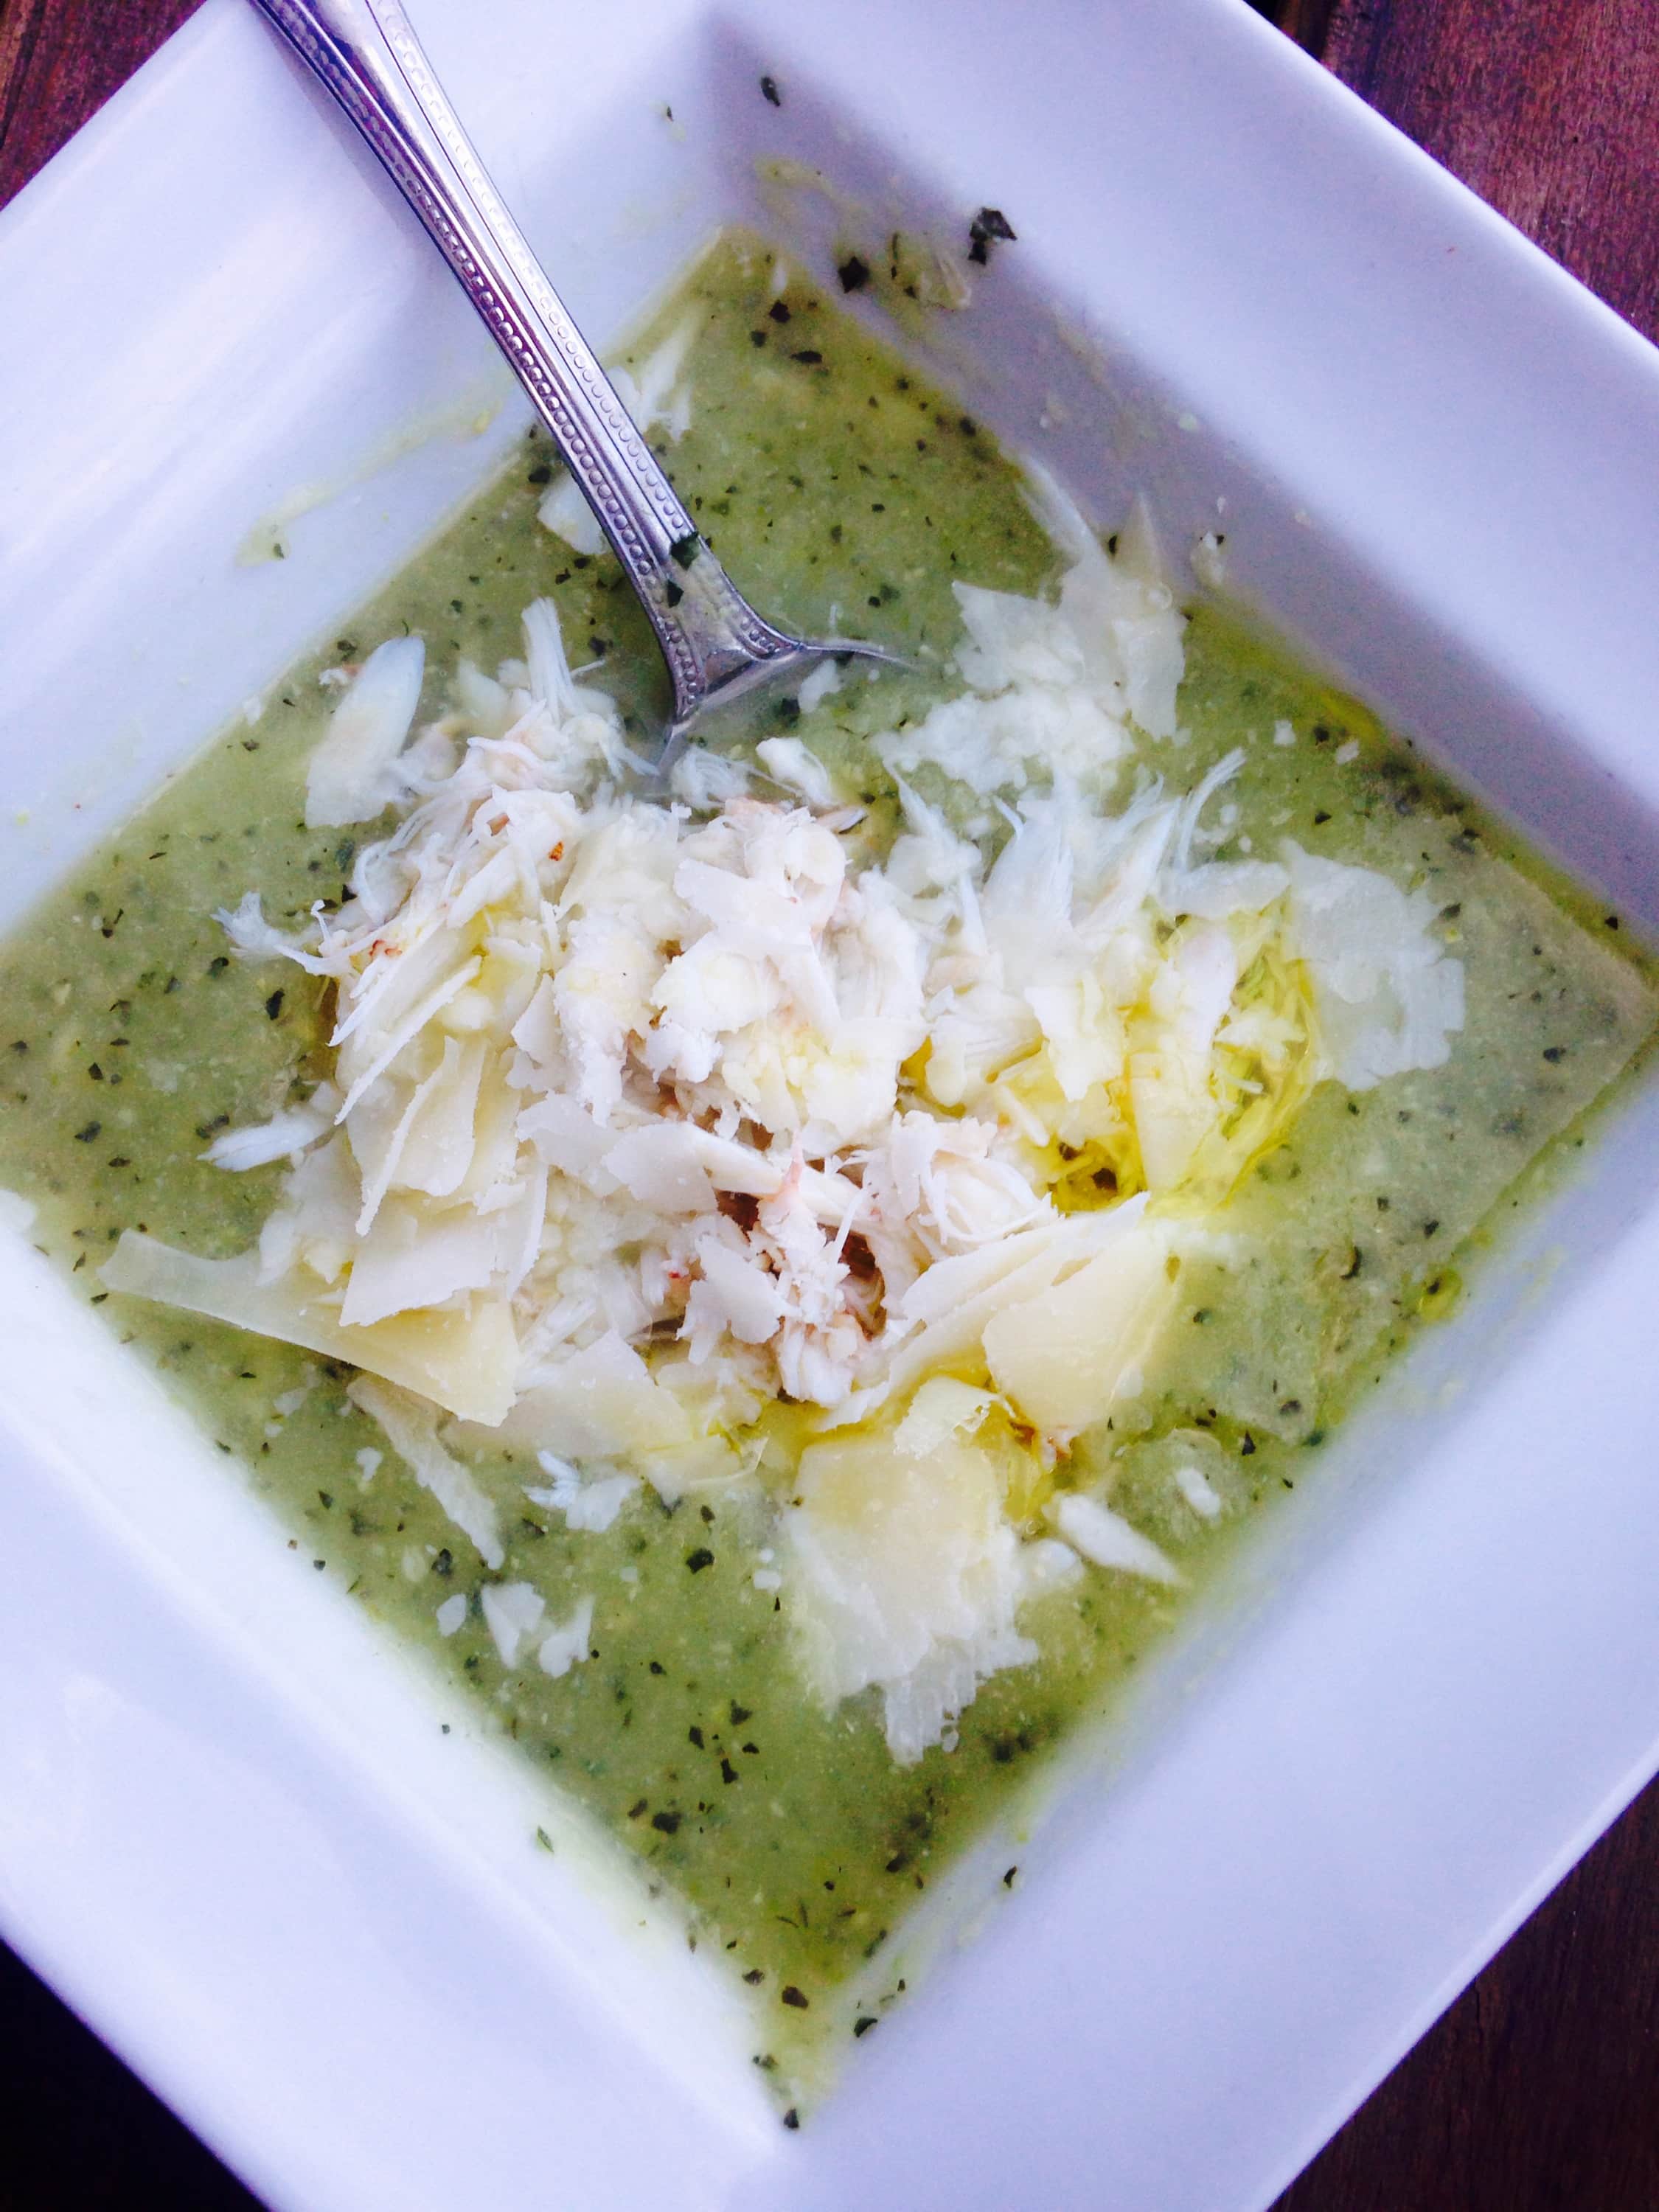 Zucchini crab soup is a delicious 21 Day Fix recipe. The soup is delicious hot or chilled, and it's a great way to use garden zucchini. 